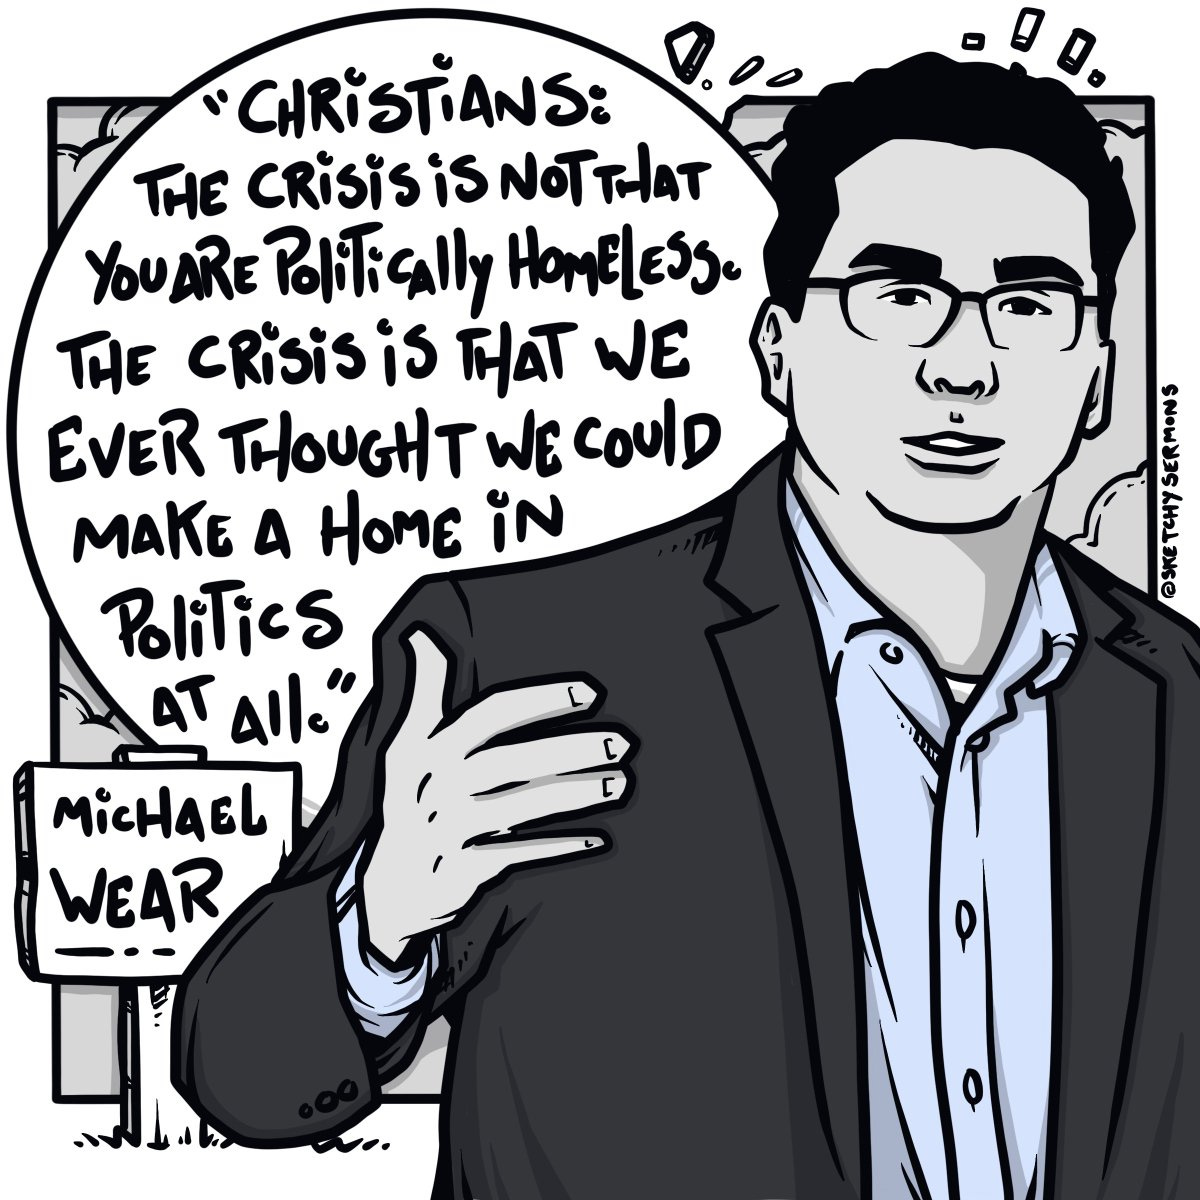 A digital portrait of Michael Wear saying “Christians: The crisis is not that you are politically homeless. The crisis is that we ever thought we could make a home in politics at all.” 